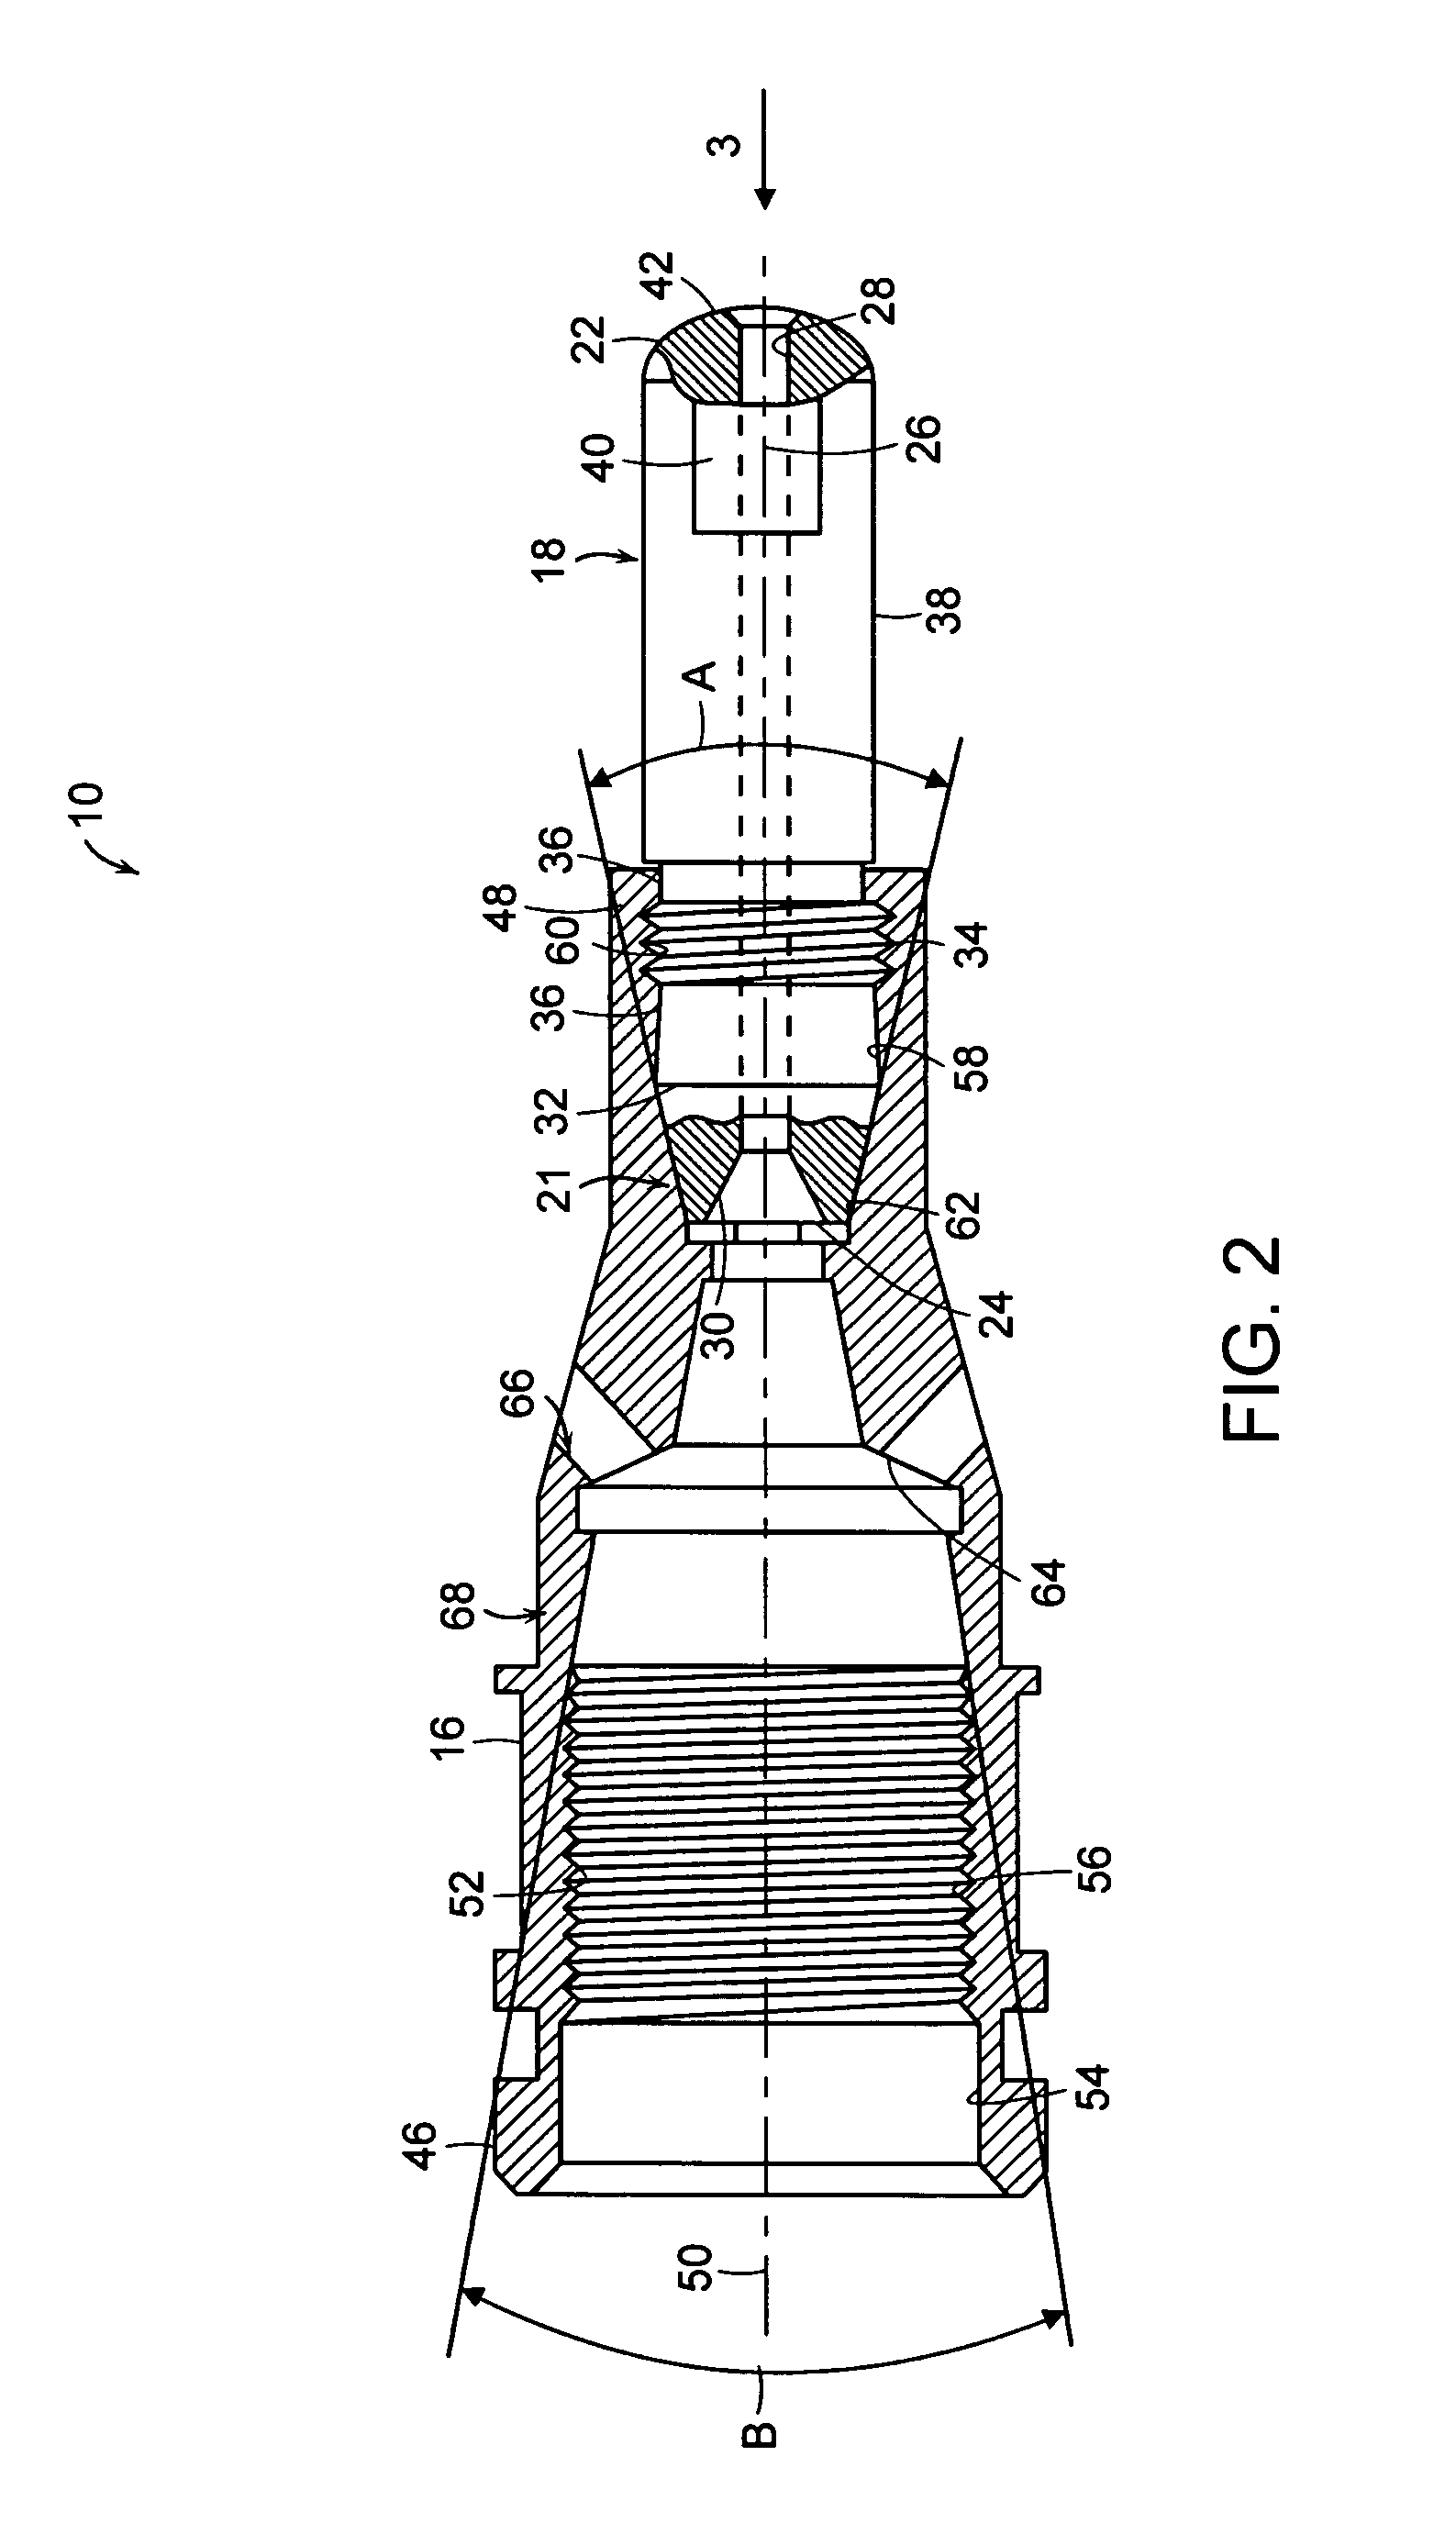 Taper locking features between components of a welding device